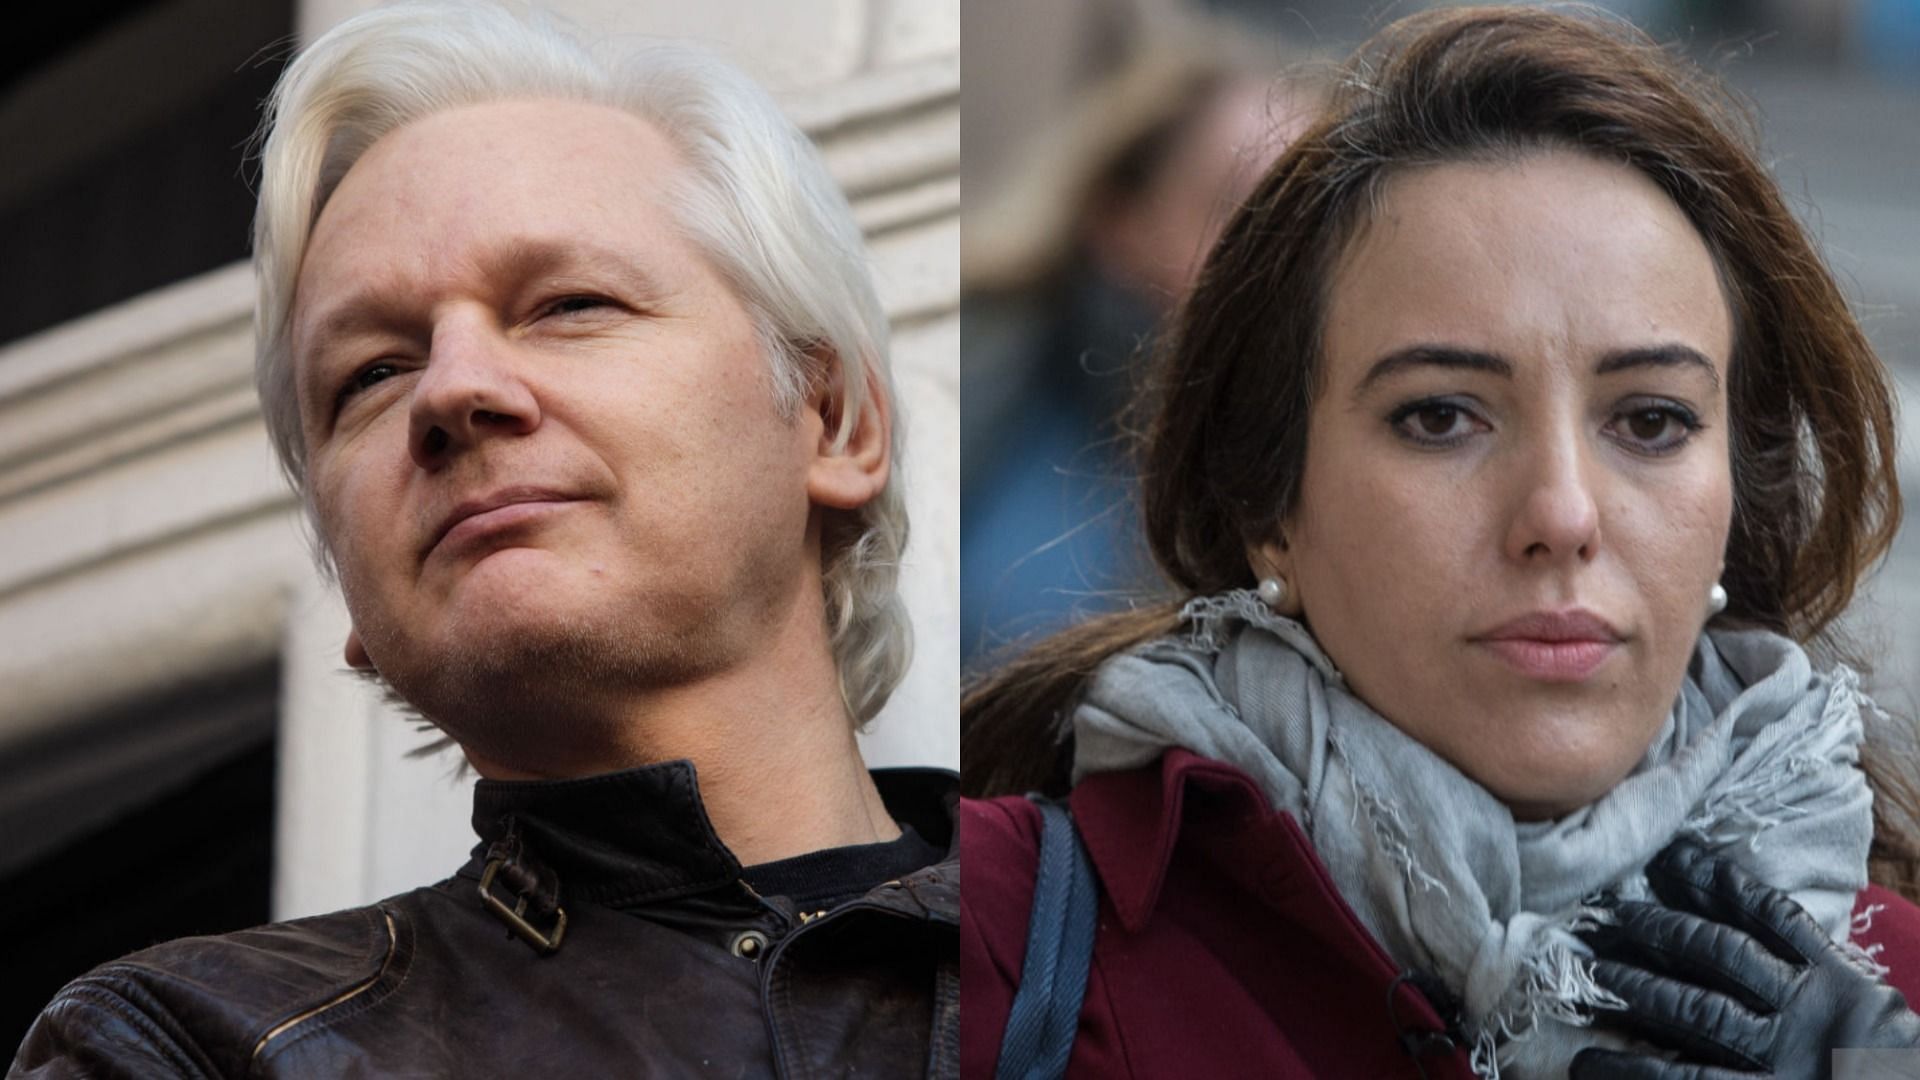 Julian Assange&#039;s fiance said that his legal team will appeal against the U.S. extradition ruling (Image via Jack Taylor/Getty Images and Guy Smallman/Getty Images)